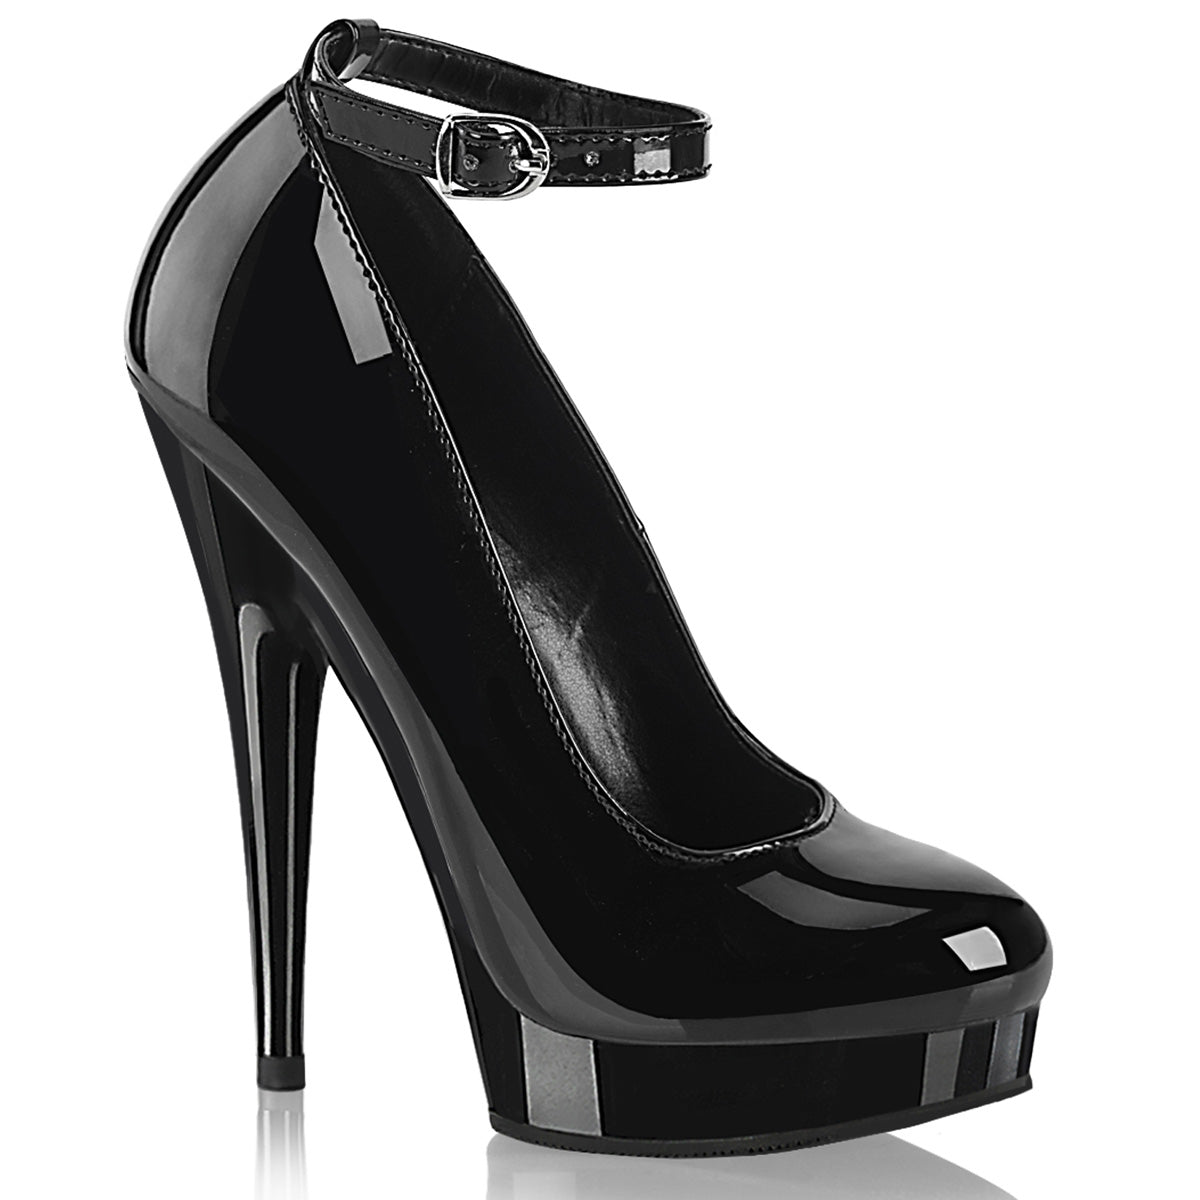 SULTRY-686 Black Patent/Black Fabulicious